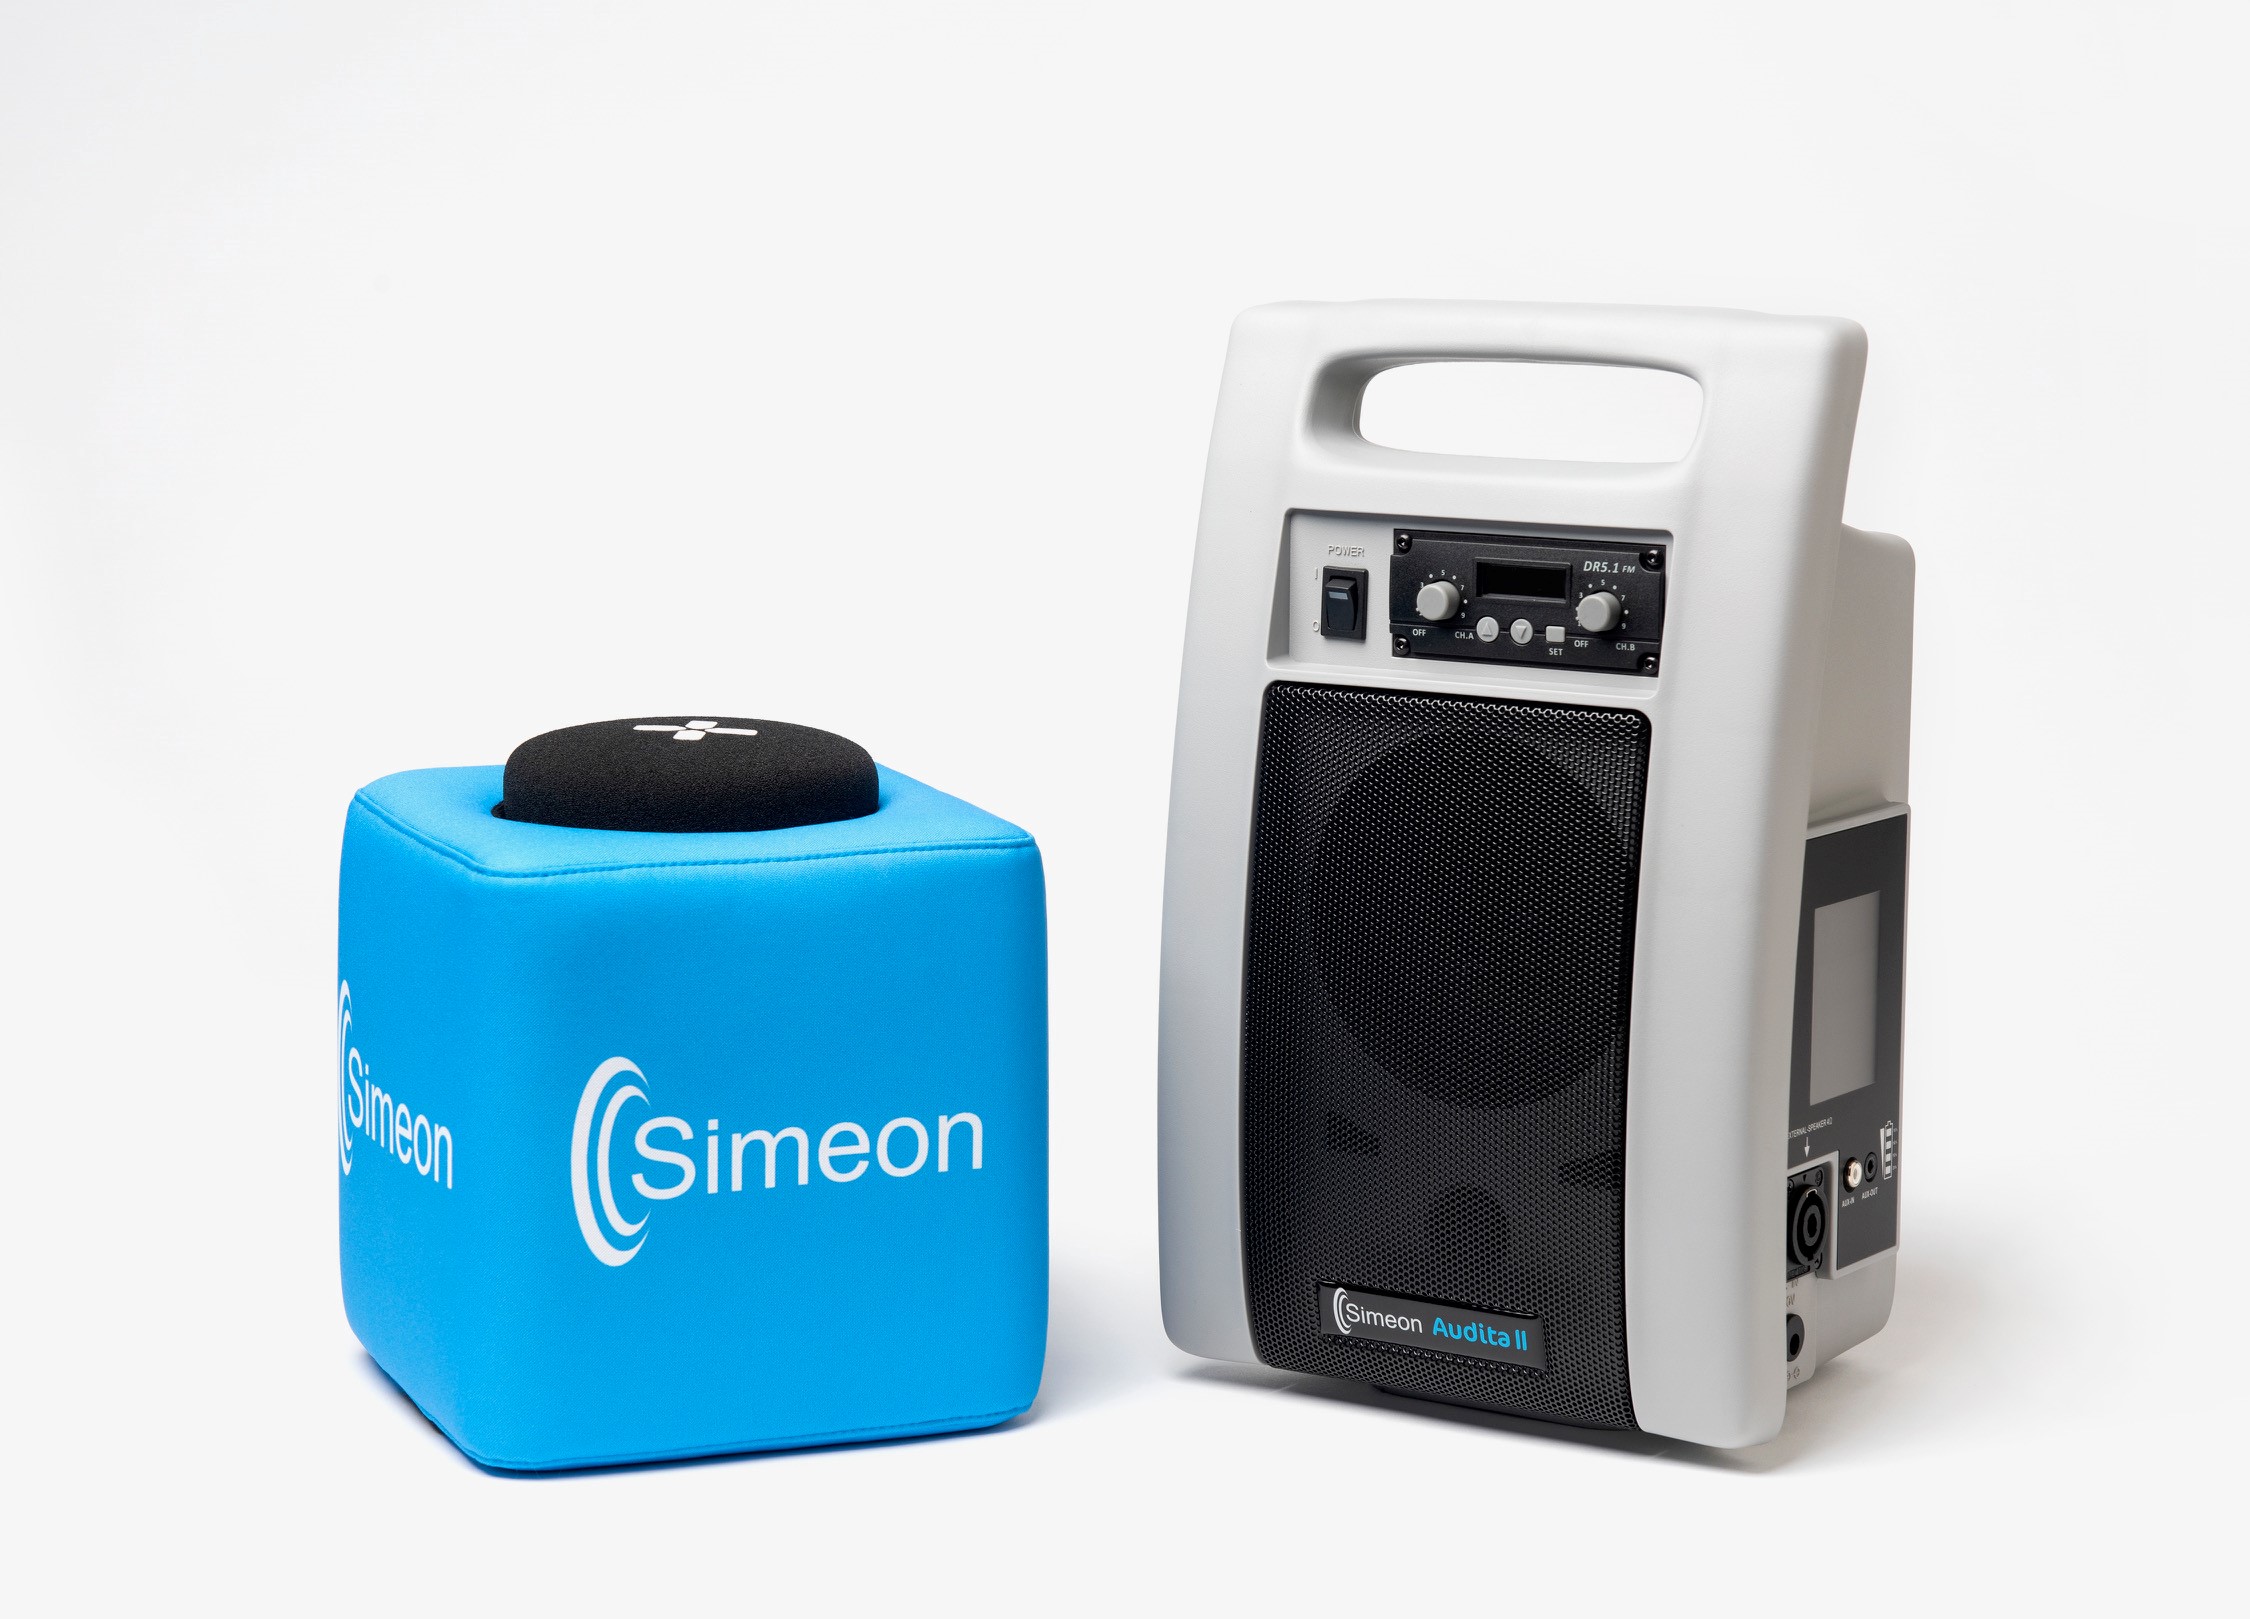 Resources Brochures and Guides. Simeon Audita is an affordable voice amplifier. Find guides and manuals on how to use or troubleshoot on this page